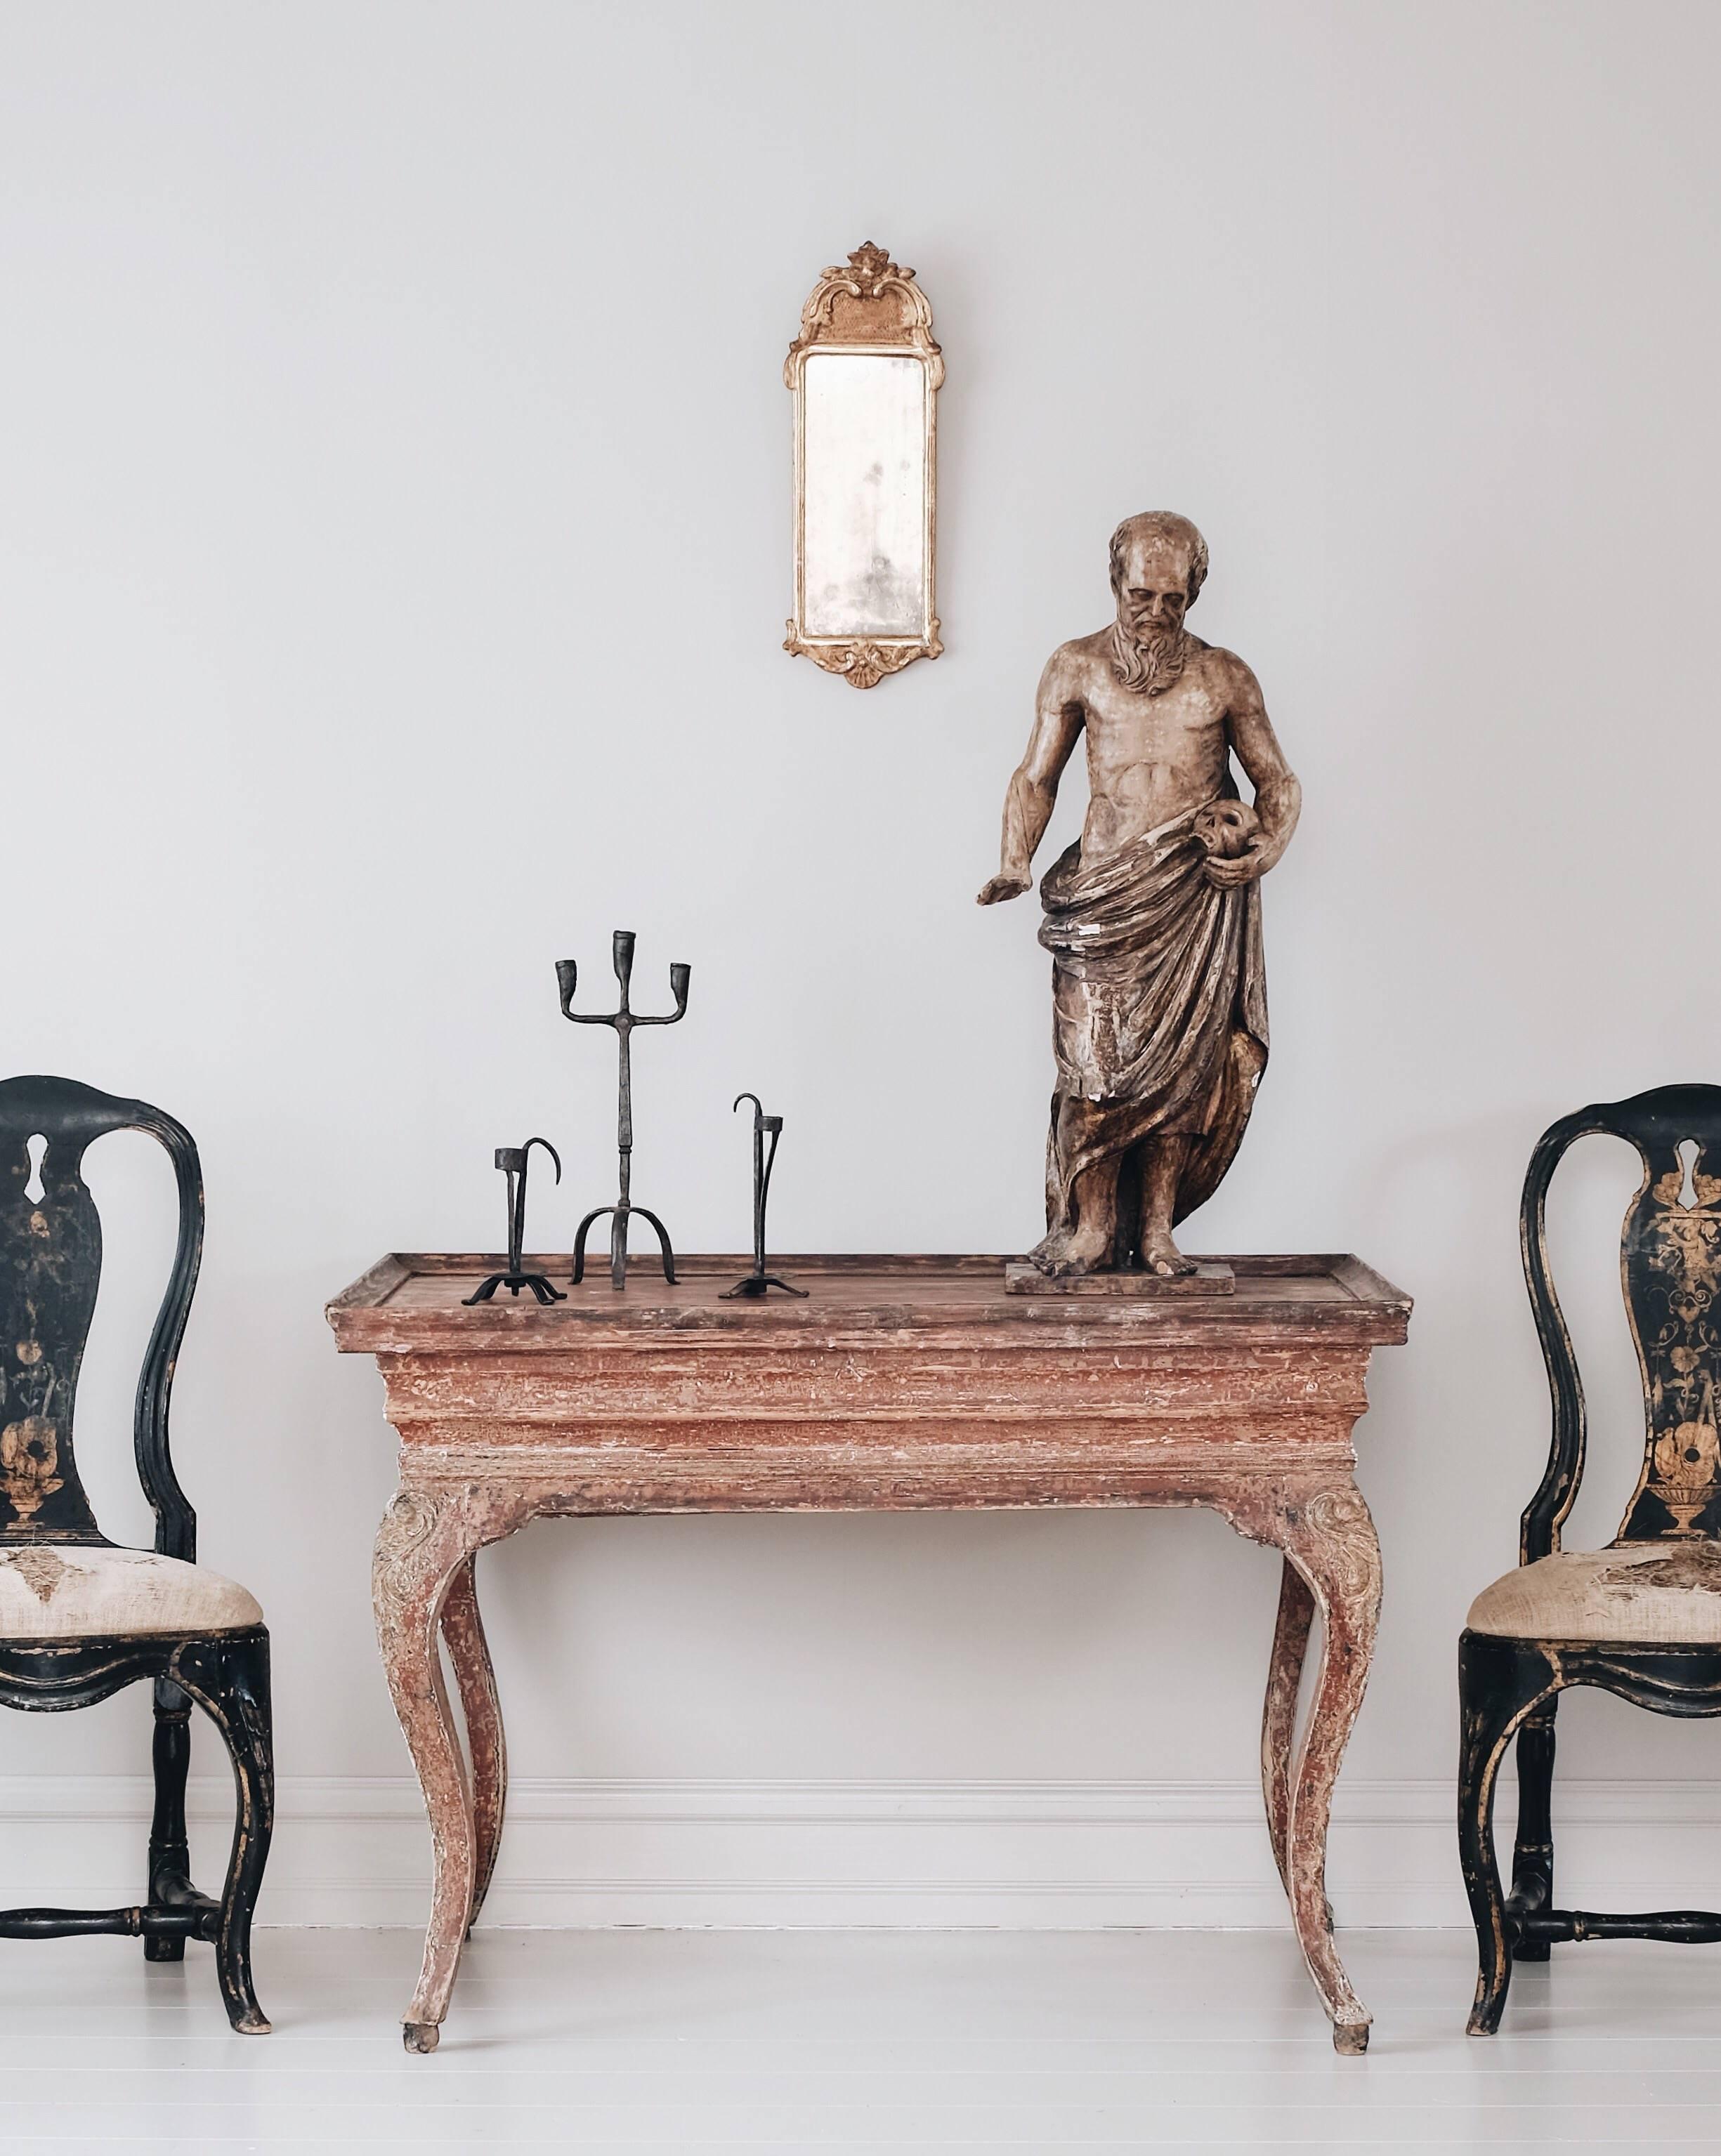 Remarkable 18th century Norwegian Rococo tray table with fine carvings, circa 1760, Norway.